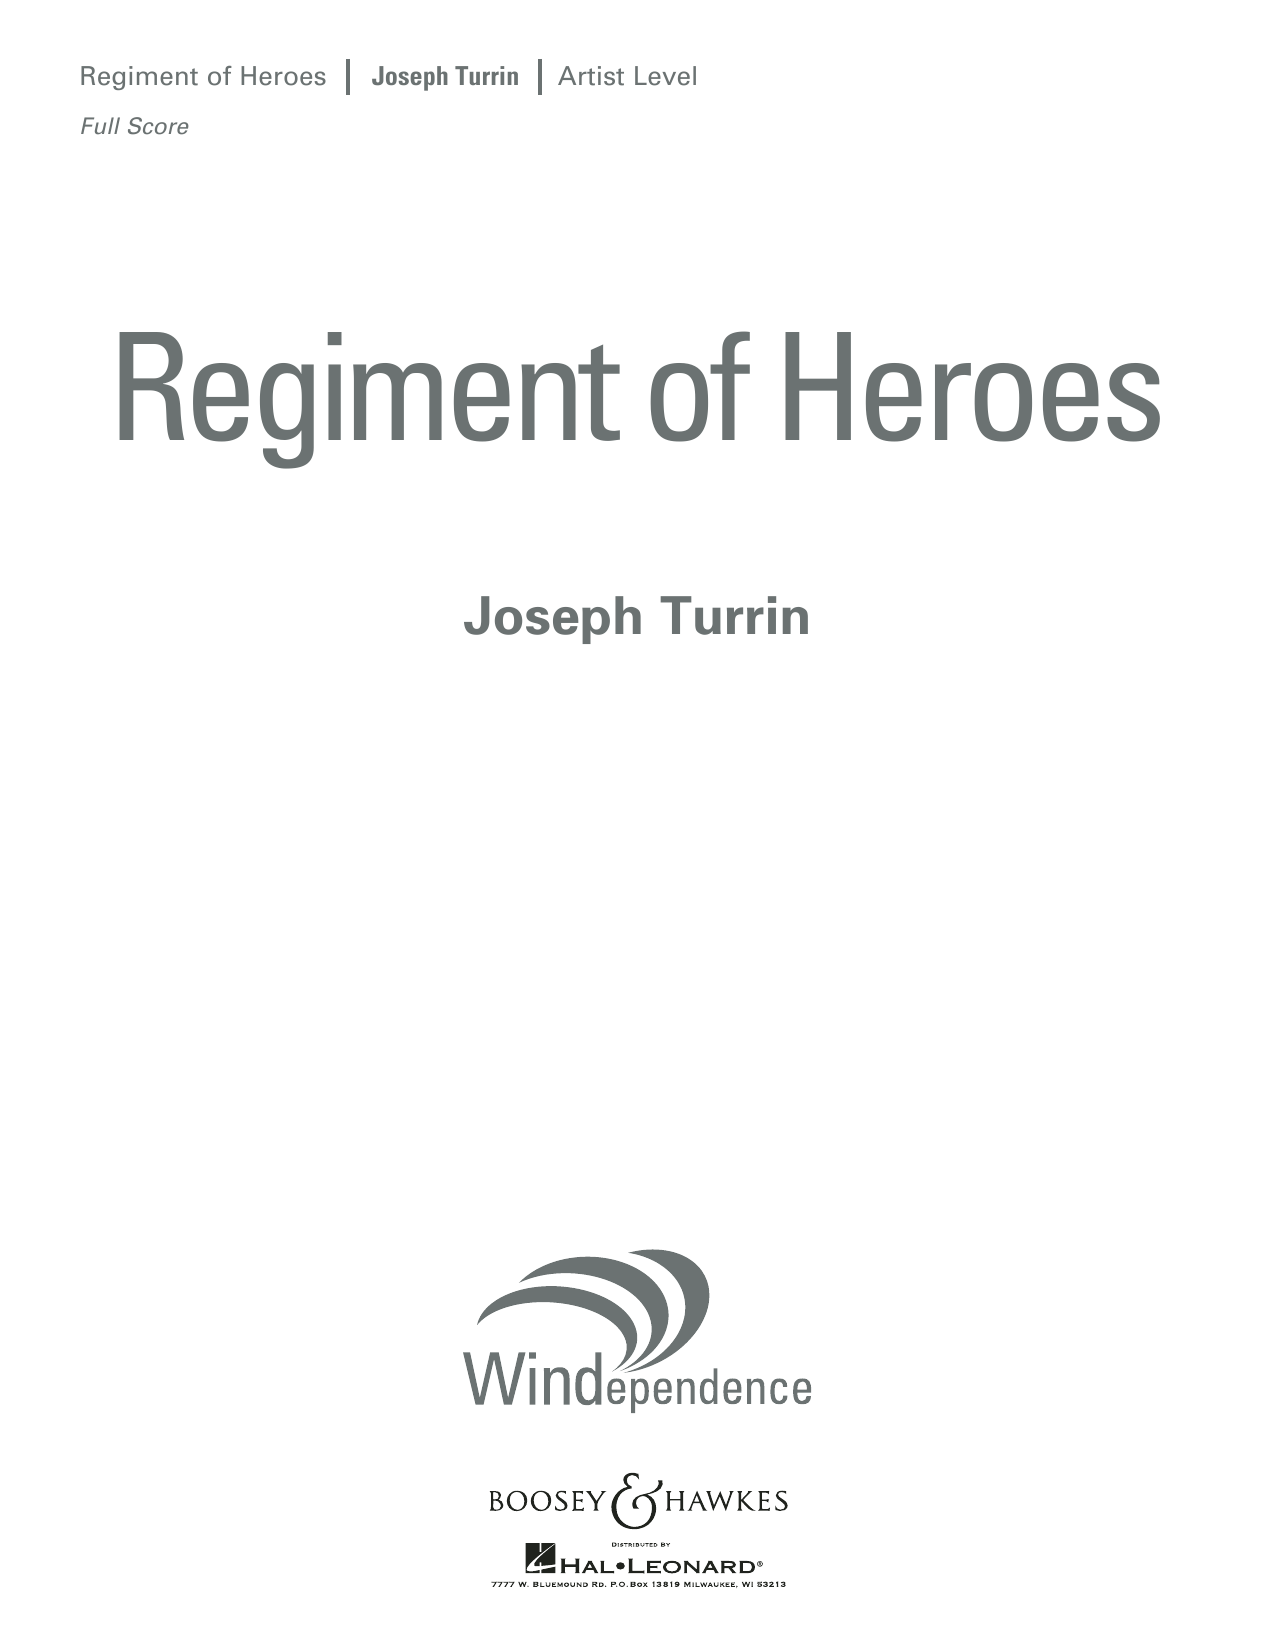 Joseph Turrin Regiment Of Heroes Windependence Artist Level - Conductor Score (Full Score) sheet music preview music notes and score for Concert Band including 31 page(s)